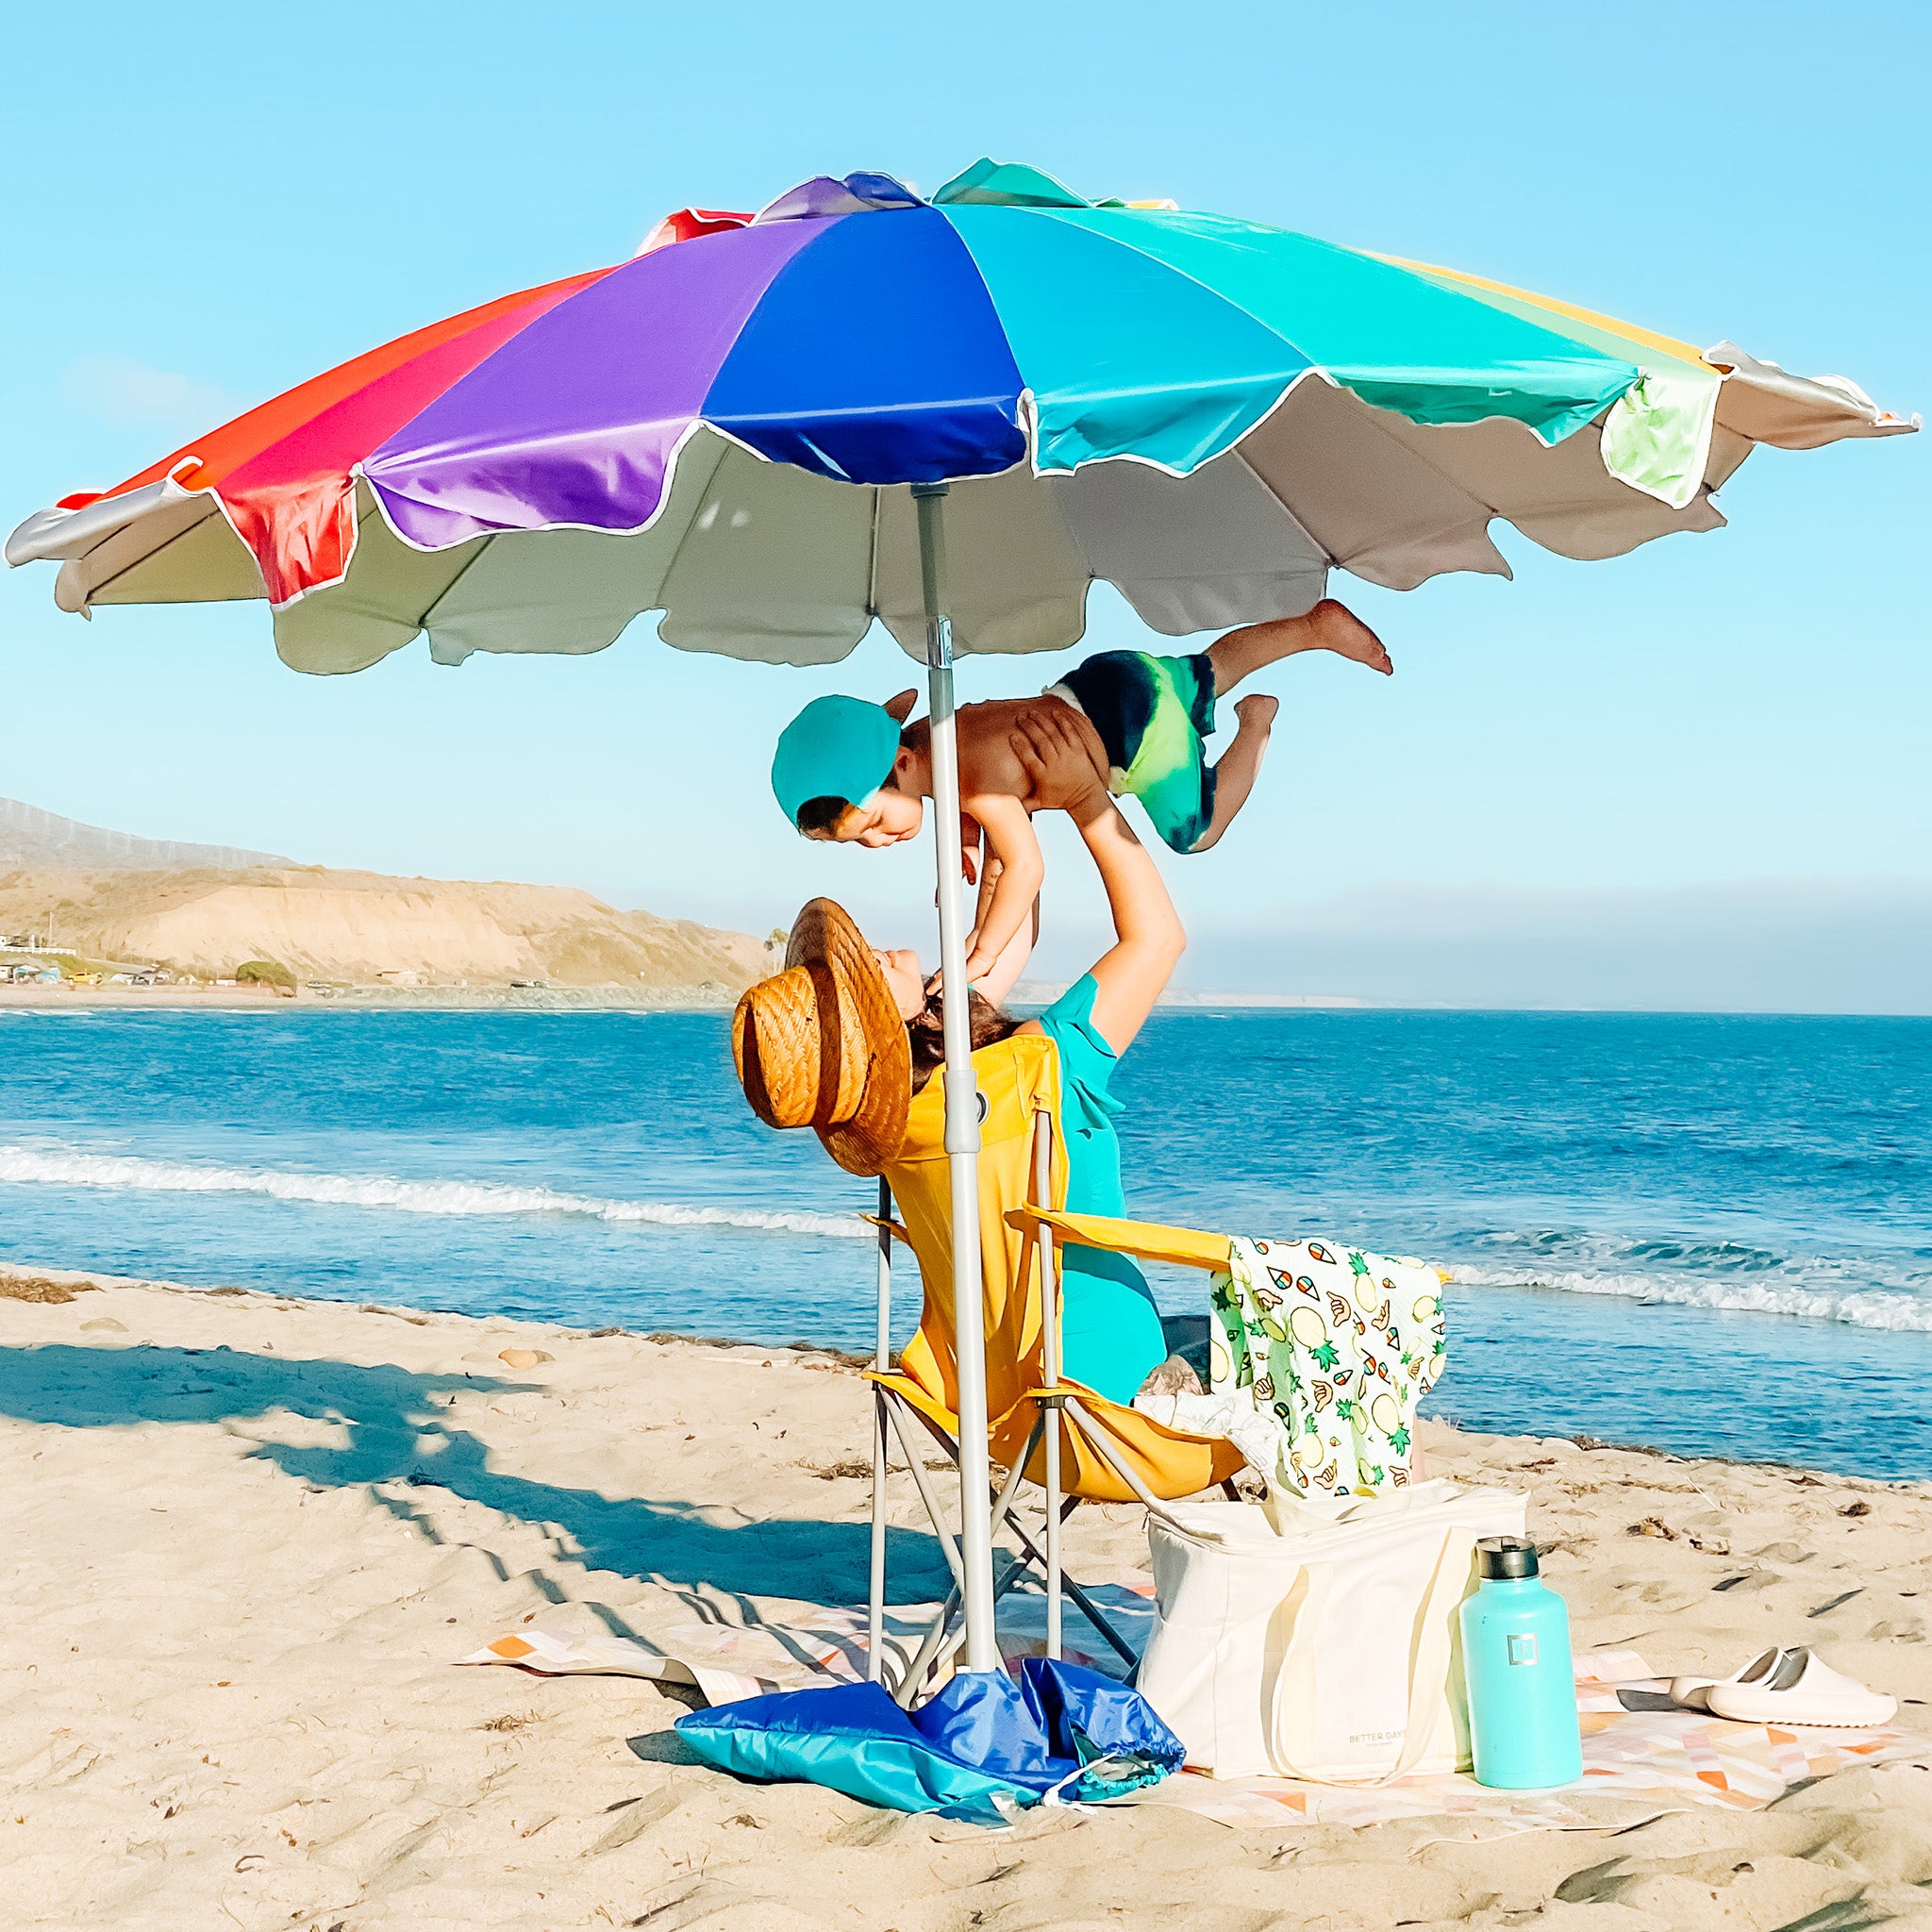 How to Prevent Heat-Related Illnesses at the Beach?